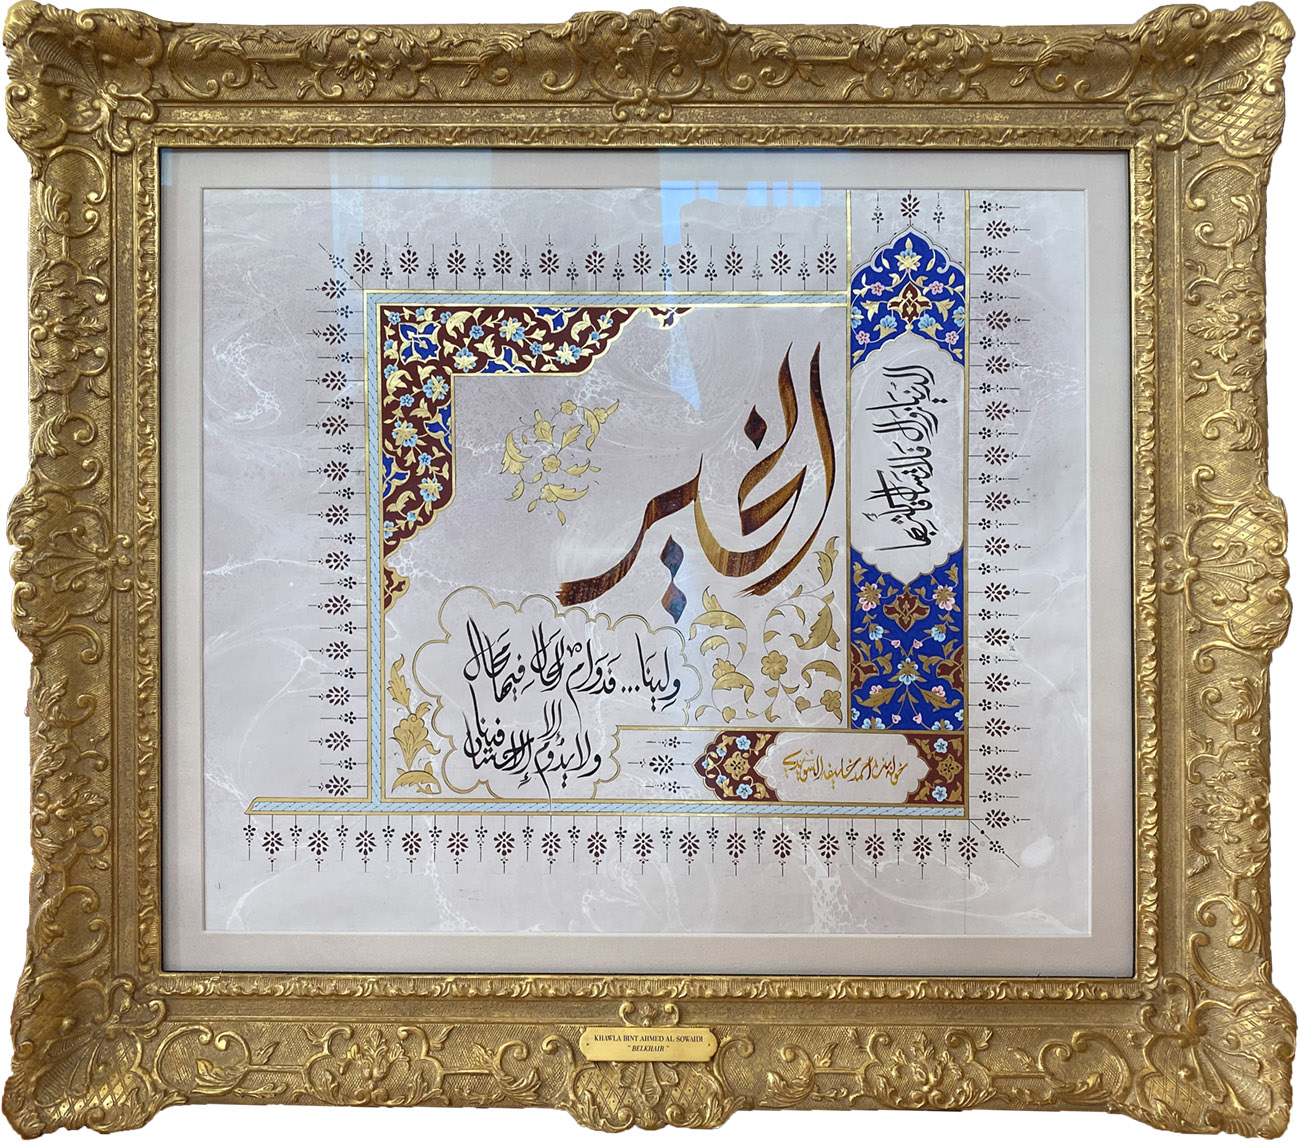 
	Elkhair (In goodness)

	Life will pass, so care not, do good deeds and be kind.

	Nothing in the world would last and nothing but kindness shall remain.

	 

	94 x 105 cm - 37 x 41.3 inches

	2013

	 
, Her Highness Sheikha Khawla Bint Ahmed Khalifa Al Suwaidi,Khawla Sheikha, Sheikha Khawla,خوله, Khawla Suwaidi,Khawla, khawla al sowaidi,khawla sowaidi,Khawla Al Suwaidi,National Poetry, Poetry, Arabic poems, Arab poet,Arab calligrapher,Arab artist,خوله السويدي, khawla alsuwaidi,khawla al suwaidi, peace and love exhibition at saatchi gallery london, peace & love,arabic poem,arabic poetry,peace and love, peace ,love, sheikha khawla bint ahmed bin khalifa al suwaidi,sheikha khawla bint ahmed bin khalifa al suwaidi,khawla  al suwaidi,khawla  alsuwaidi, khawla, خوله السويدي , خوله بنت احمد بن خليفه السويدي , خوله   احمد   السويدي  